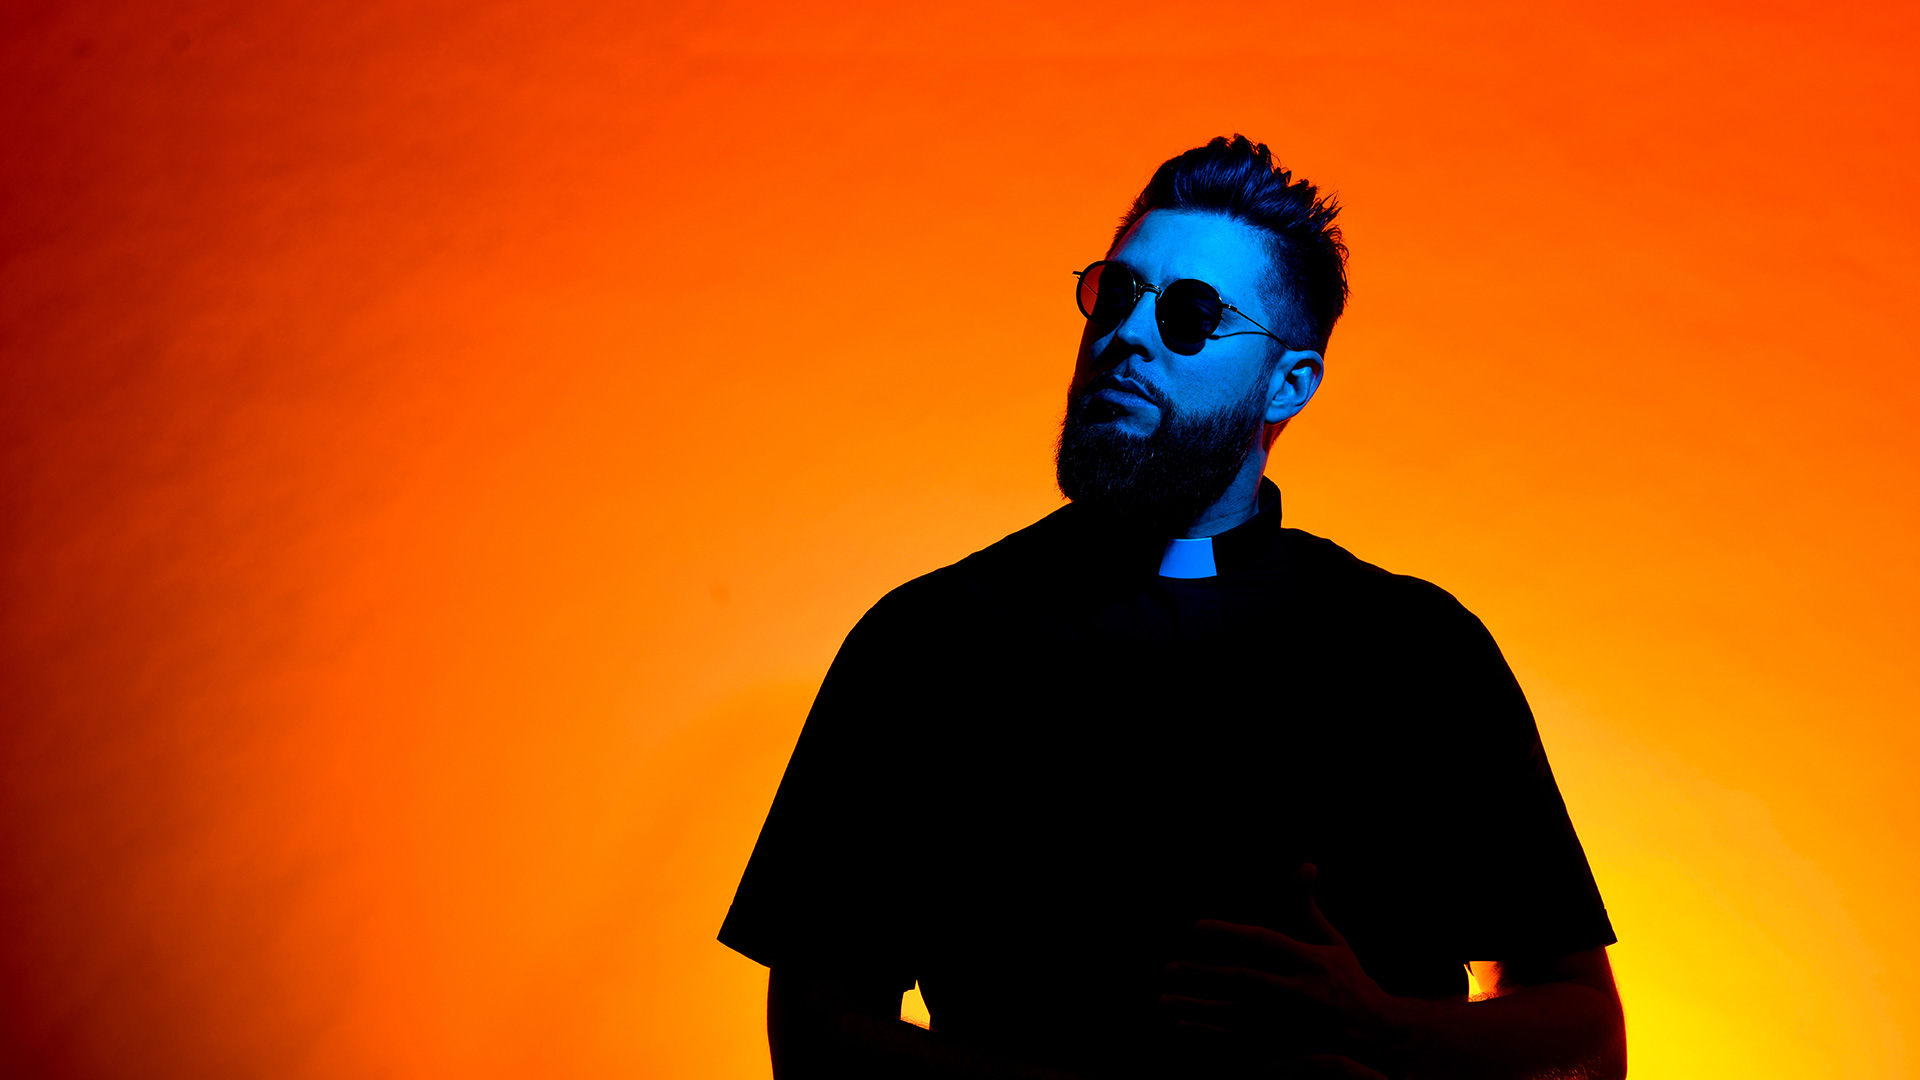 Tchami talks about 2020 and his debut album Year Zero.